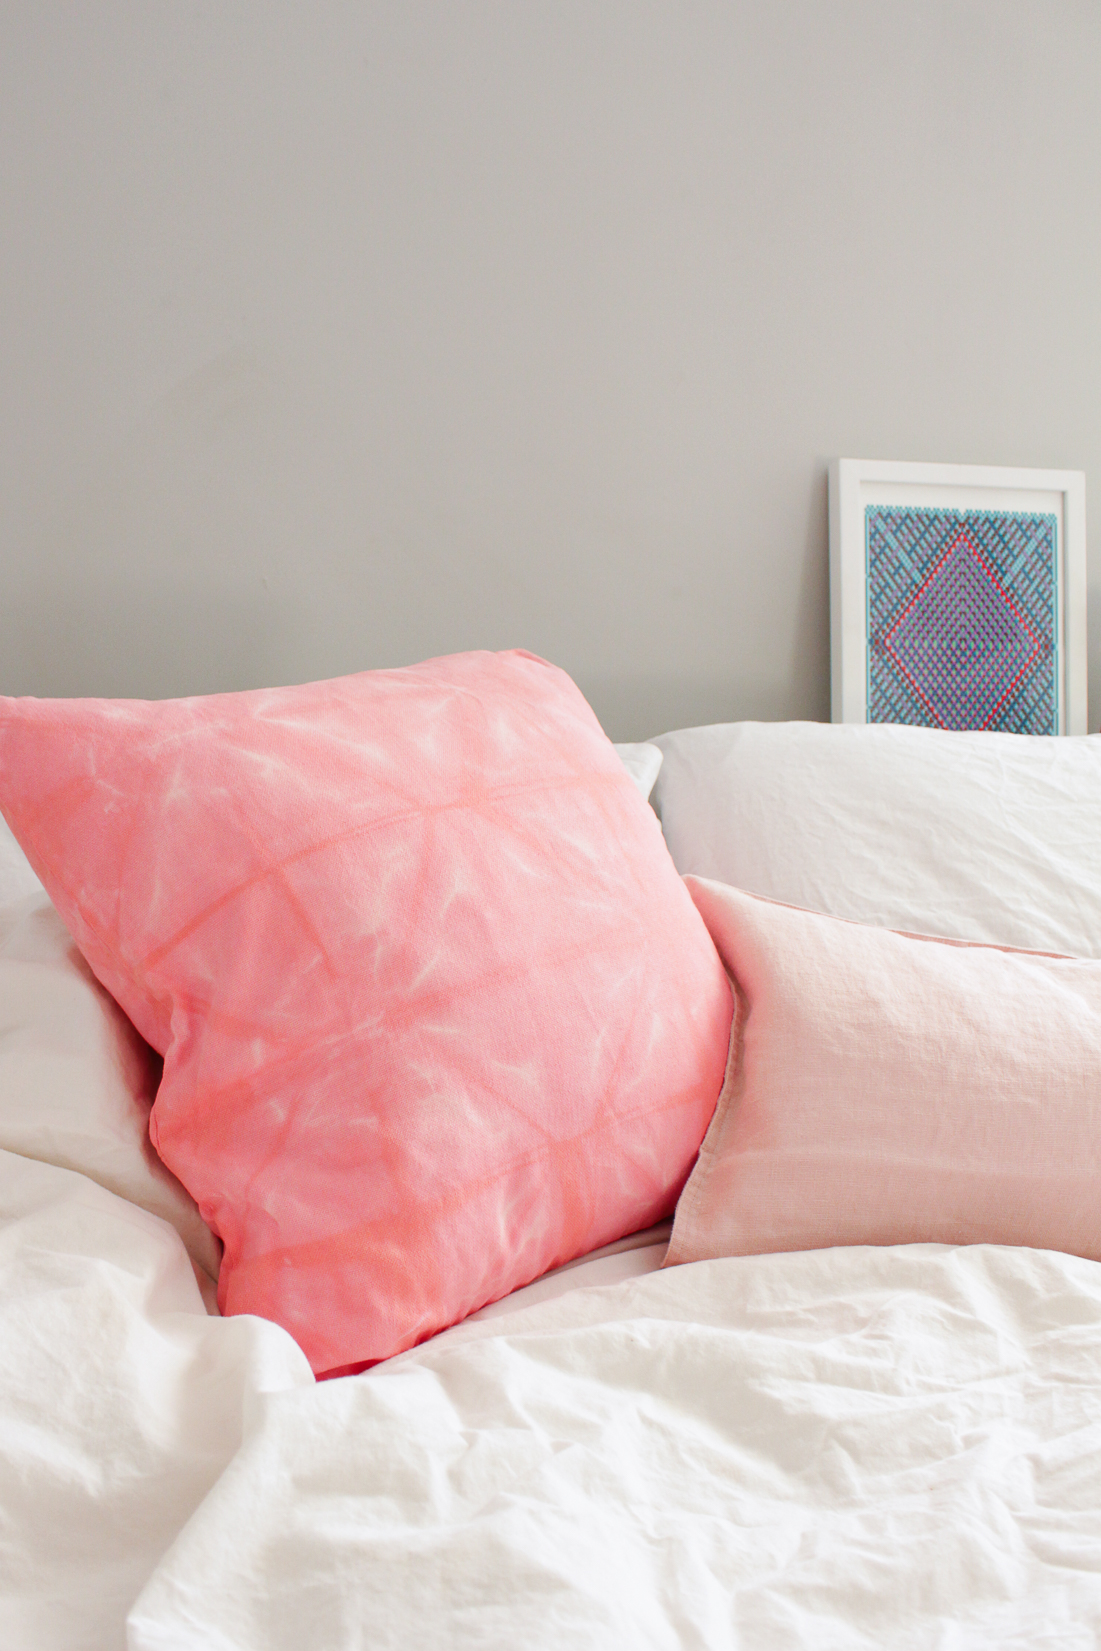 4 DIY Home Decor Projects to Try: DIY Pink Shibori Style Throw Pillow on Sugar & Cloth | Fish & Bull